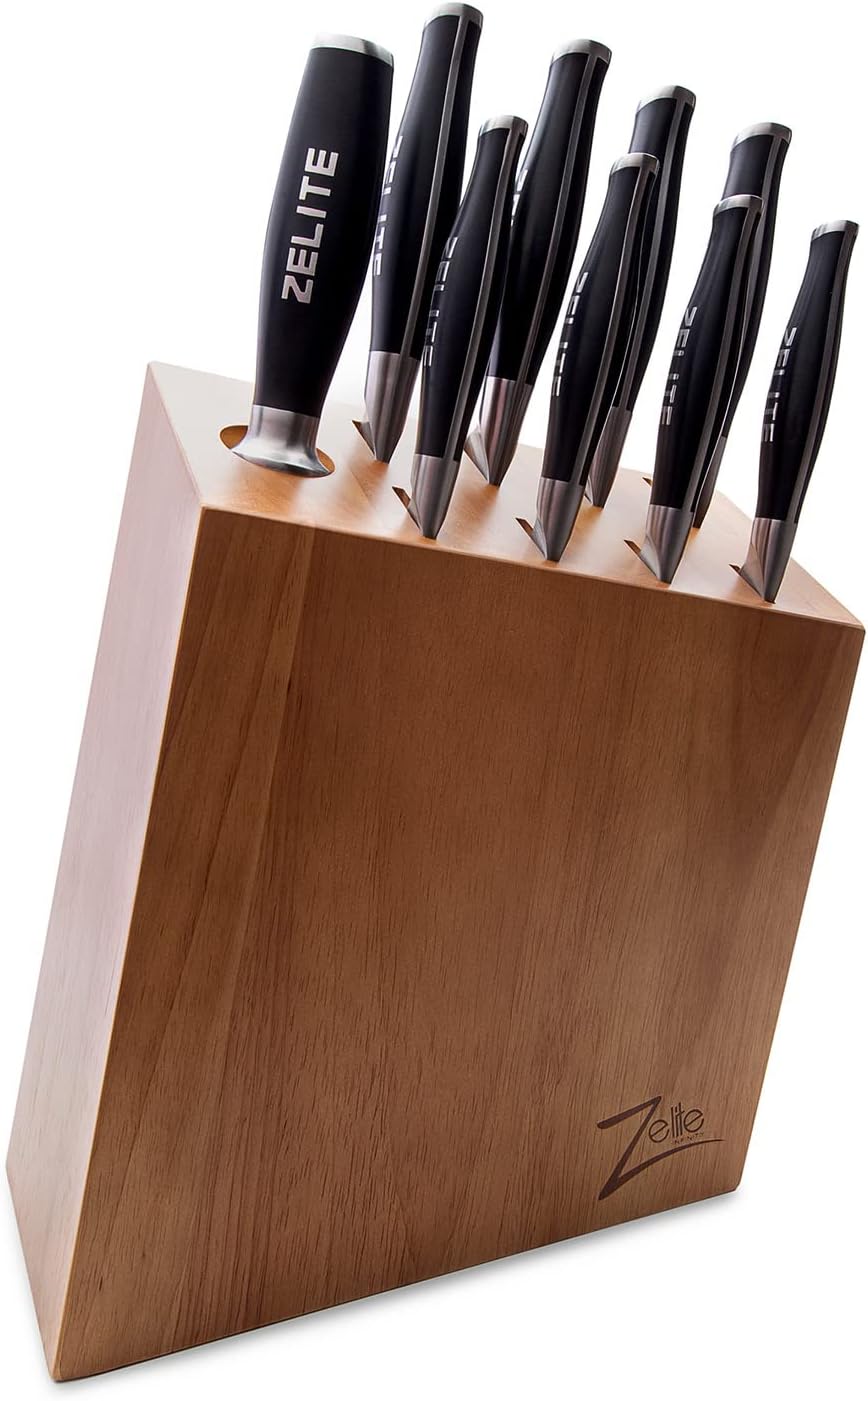 Zelite Infinity Knife Block Set (9-pc), Kitchen Knife Set, Knife Sets for Kitchen with Block - German Knife Set in High Carbon Stainless Steel - INCL. 8 Professional Knife Set  Honing Steel 10 Inch